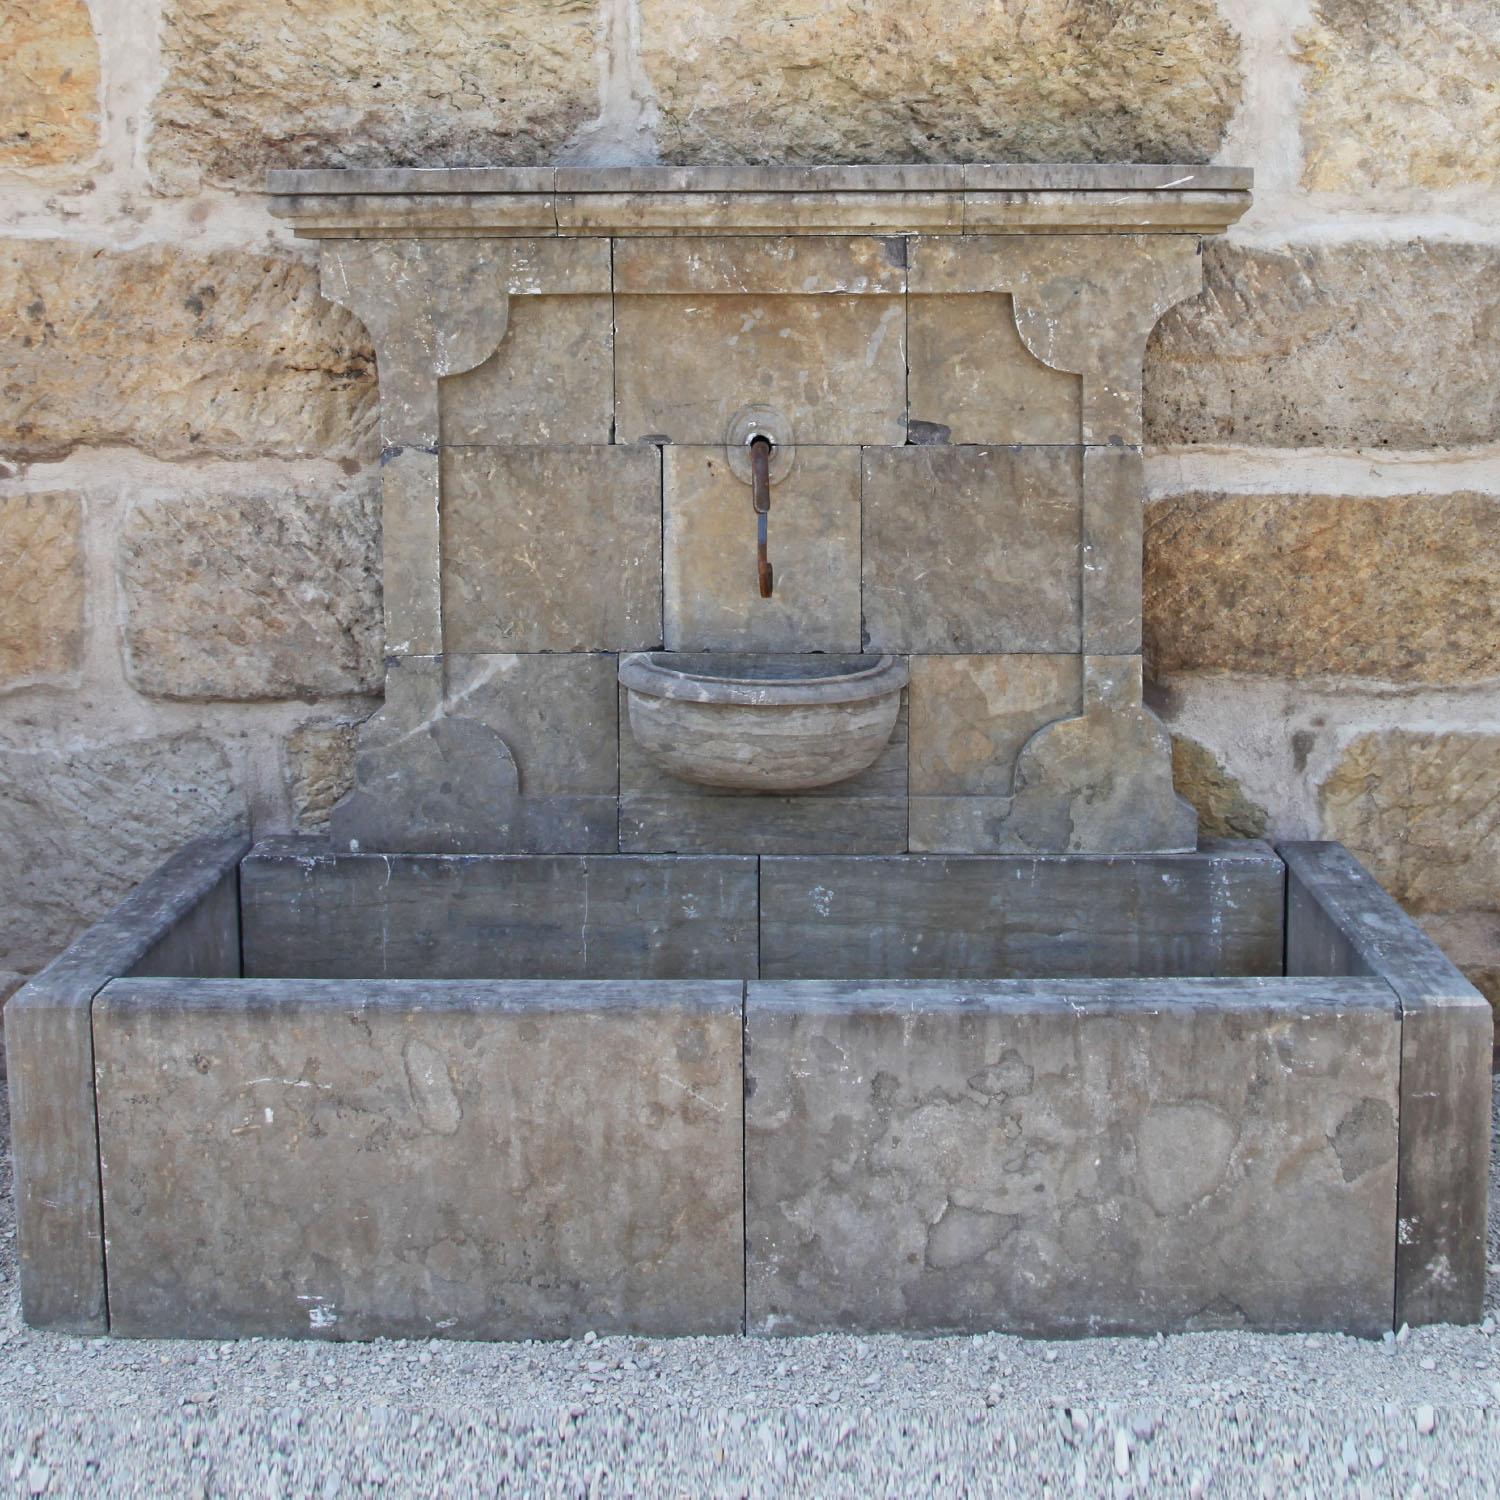 Large wall fountain with a rectangular basin (H: 48 cm) and a smaller, half-moon shaped sink. The tall rear wall shows a slightly protruding cornice and a filling with rounded corners. The fountain is hand-carved out of bluestone.